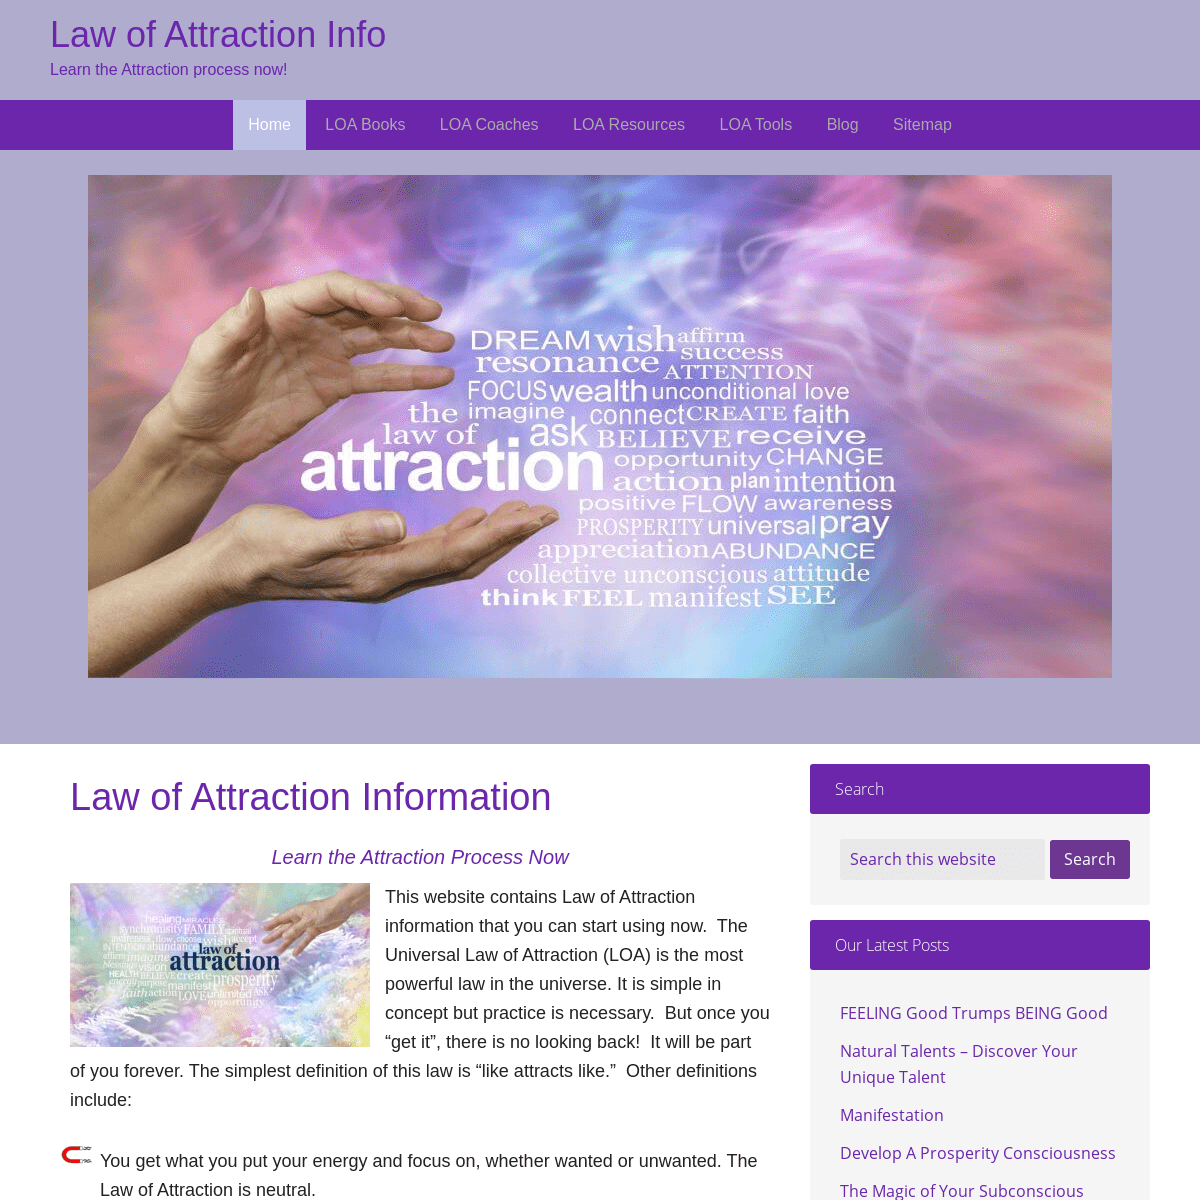 A complete backup of law-of-attraction-info.com